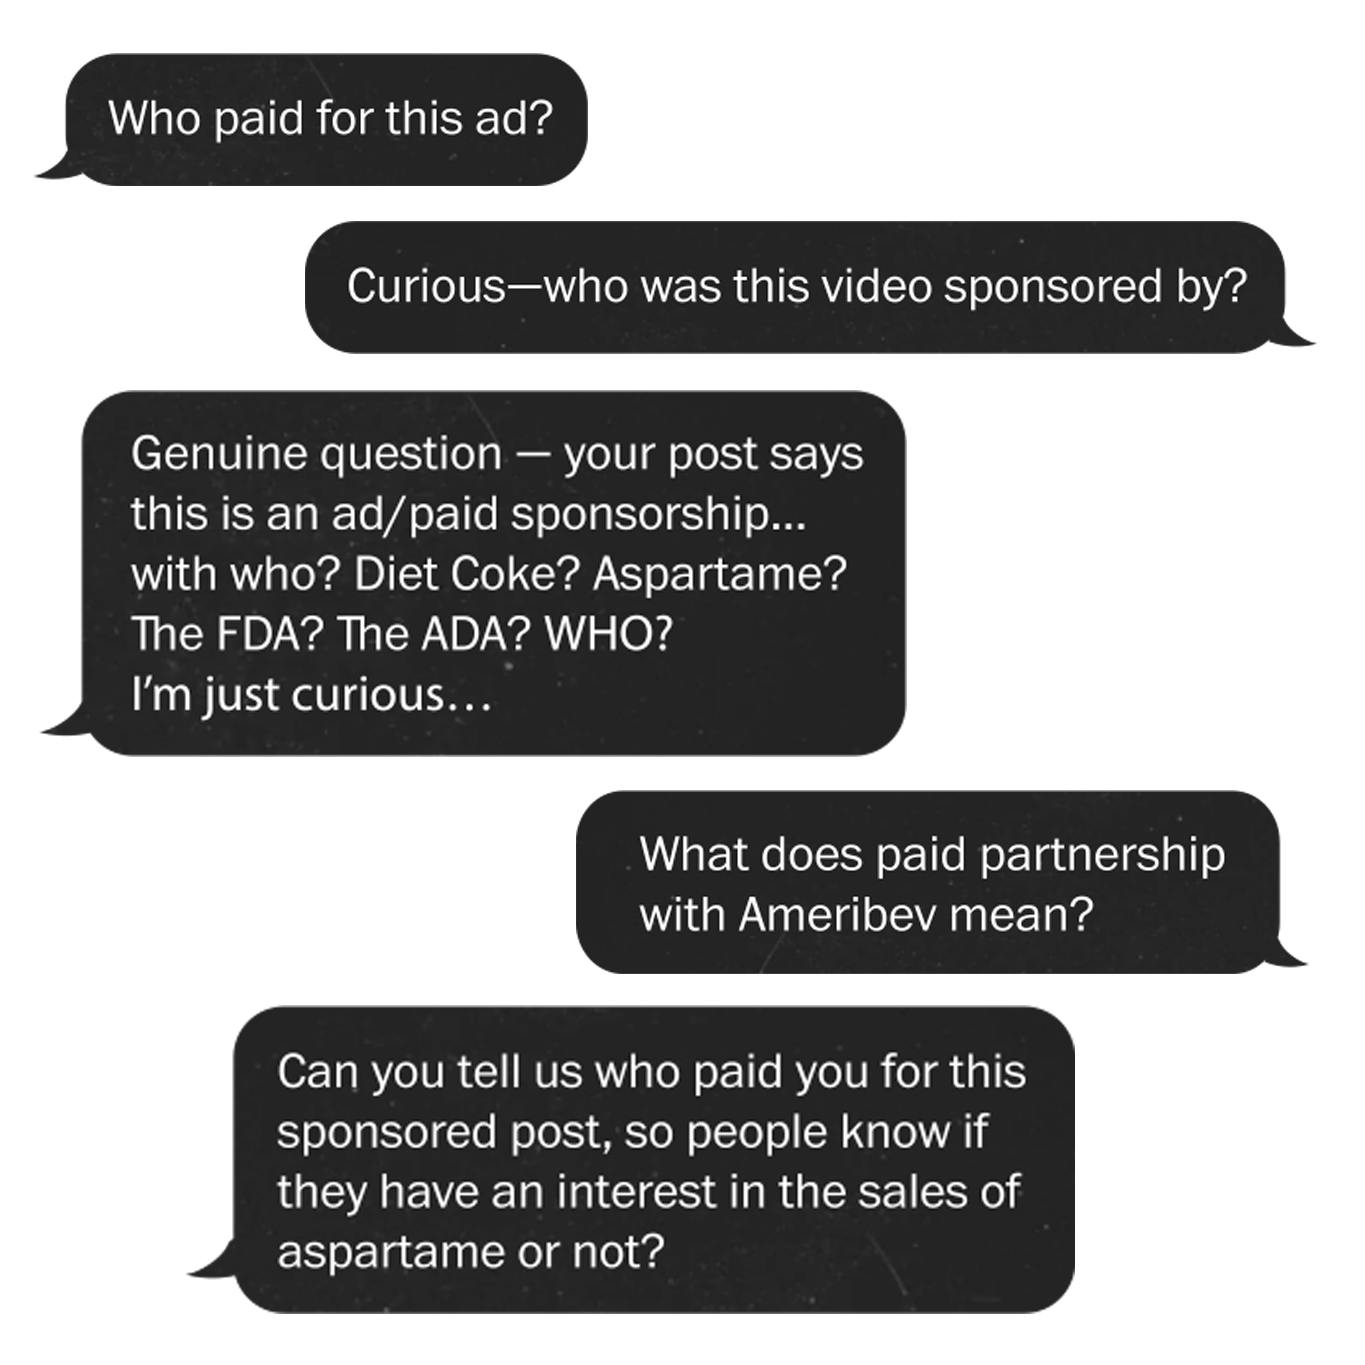 Screesnhot of comments on social media posts on paid sponsorships